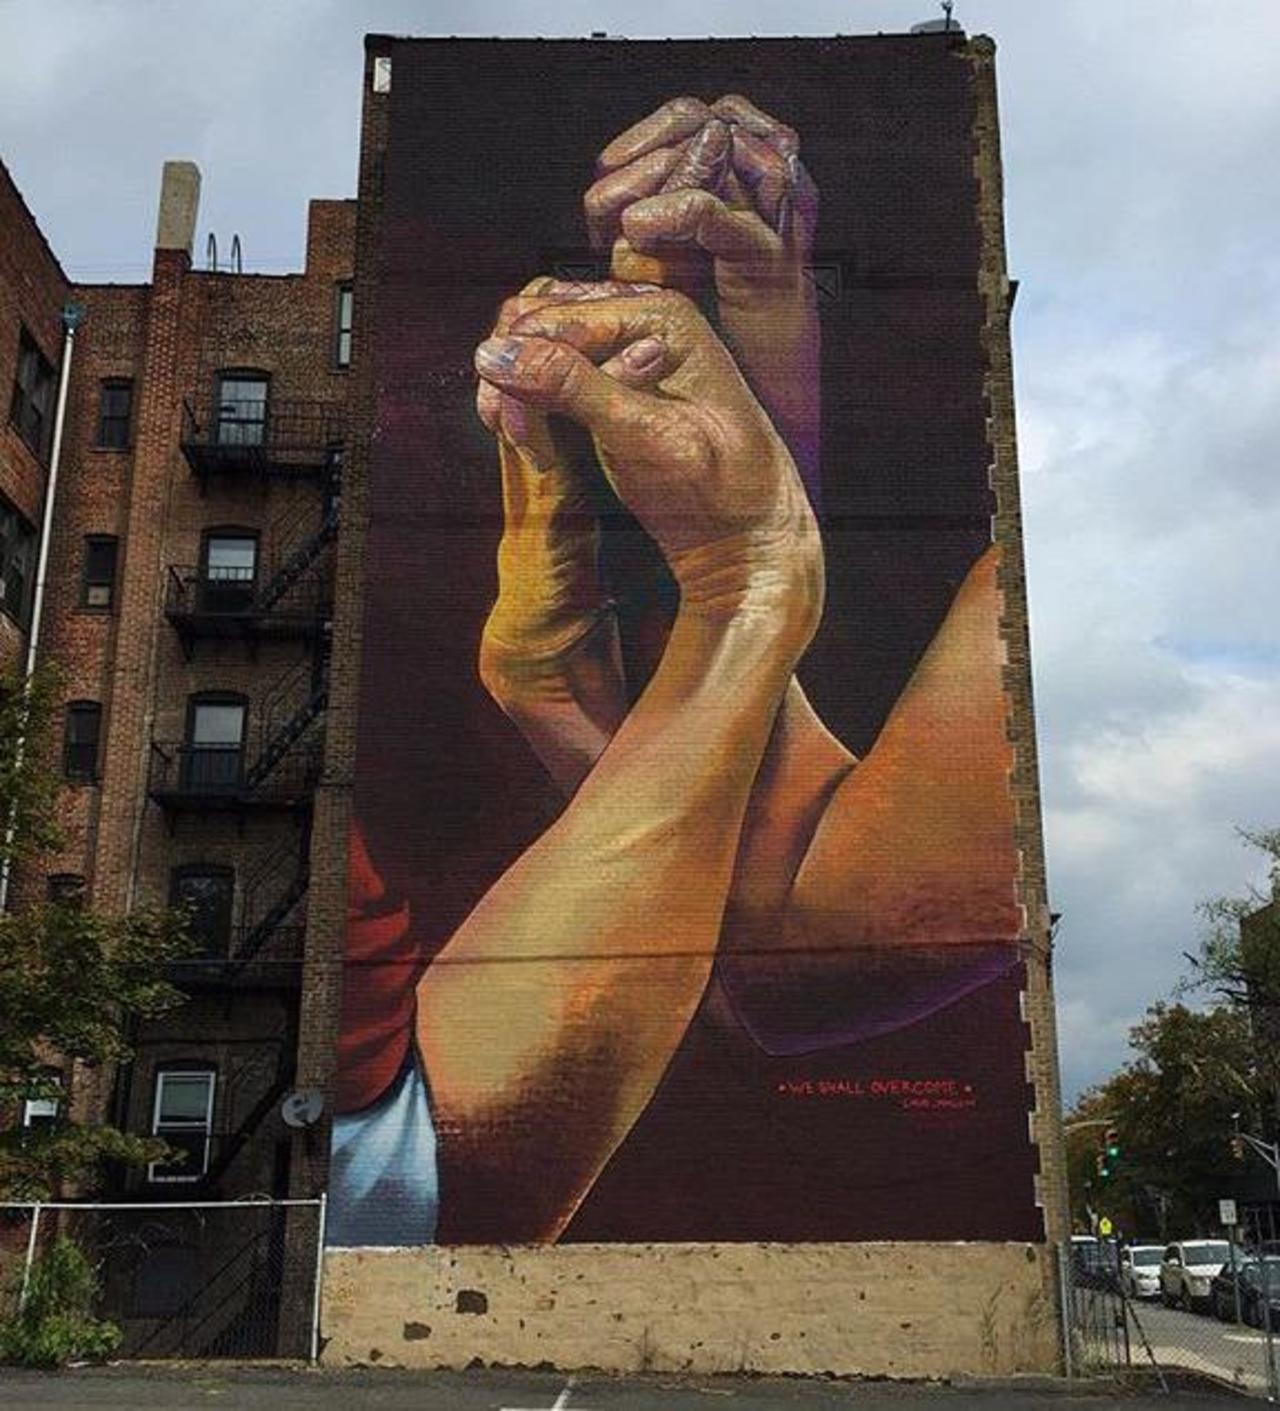 New Street Art by CaseMaclaim in Jersey City for the TheBKcollective 

#art #graffiti #mural #streetart http://t.co/7Qd9KF4Pmp